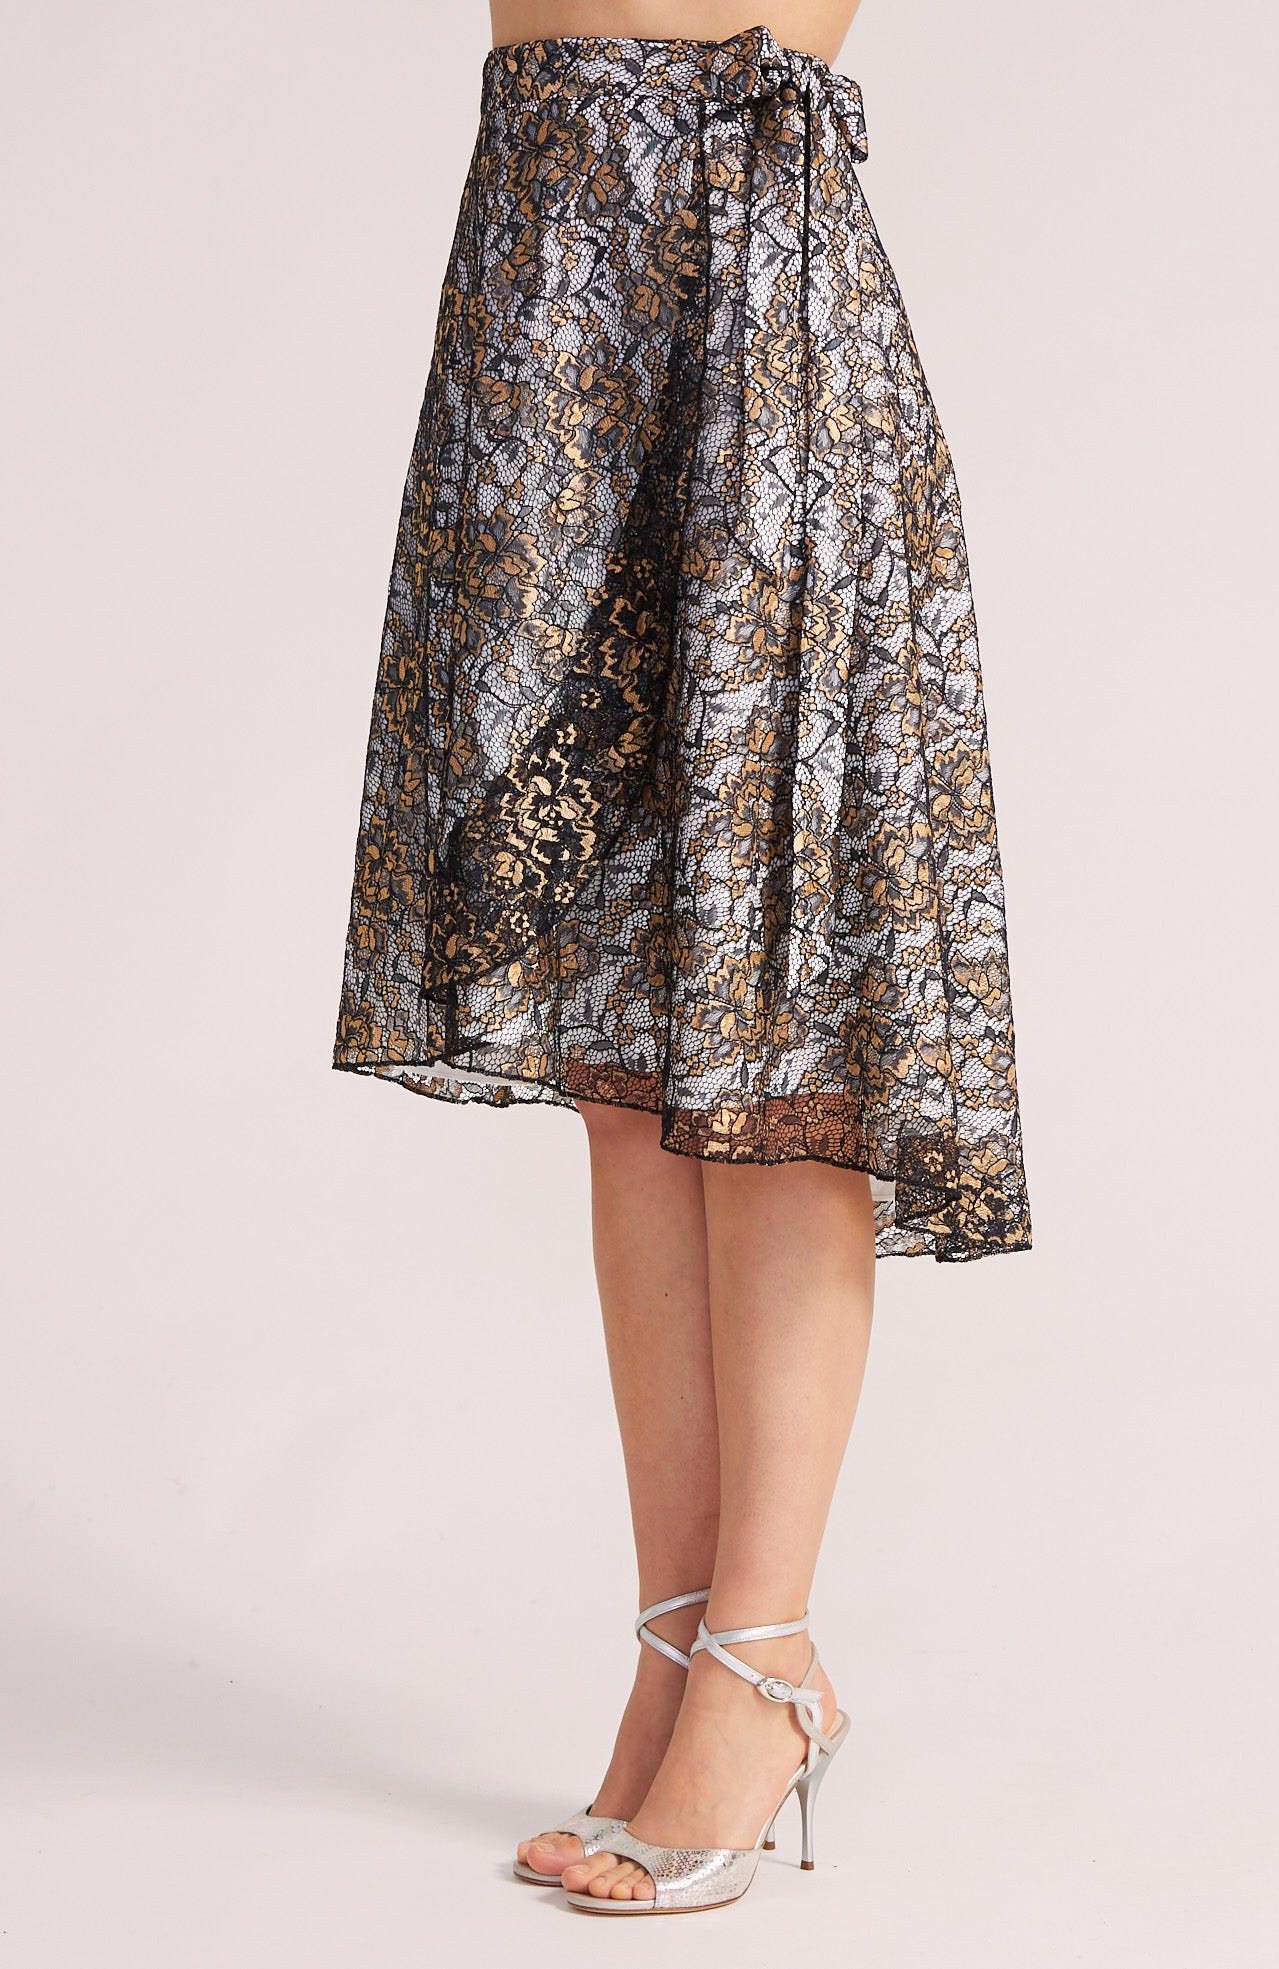 COCO - Wrap Skirt in Golden Lace